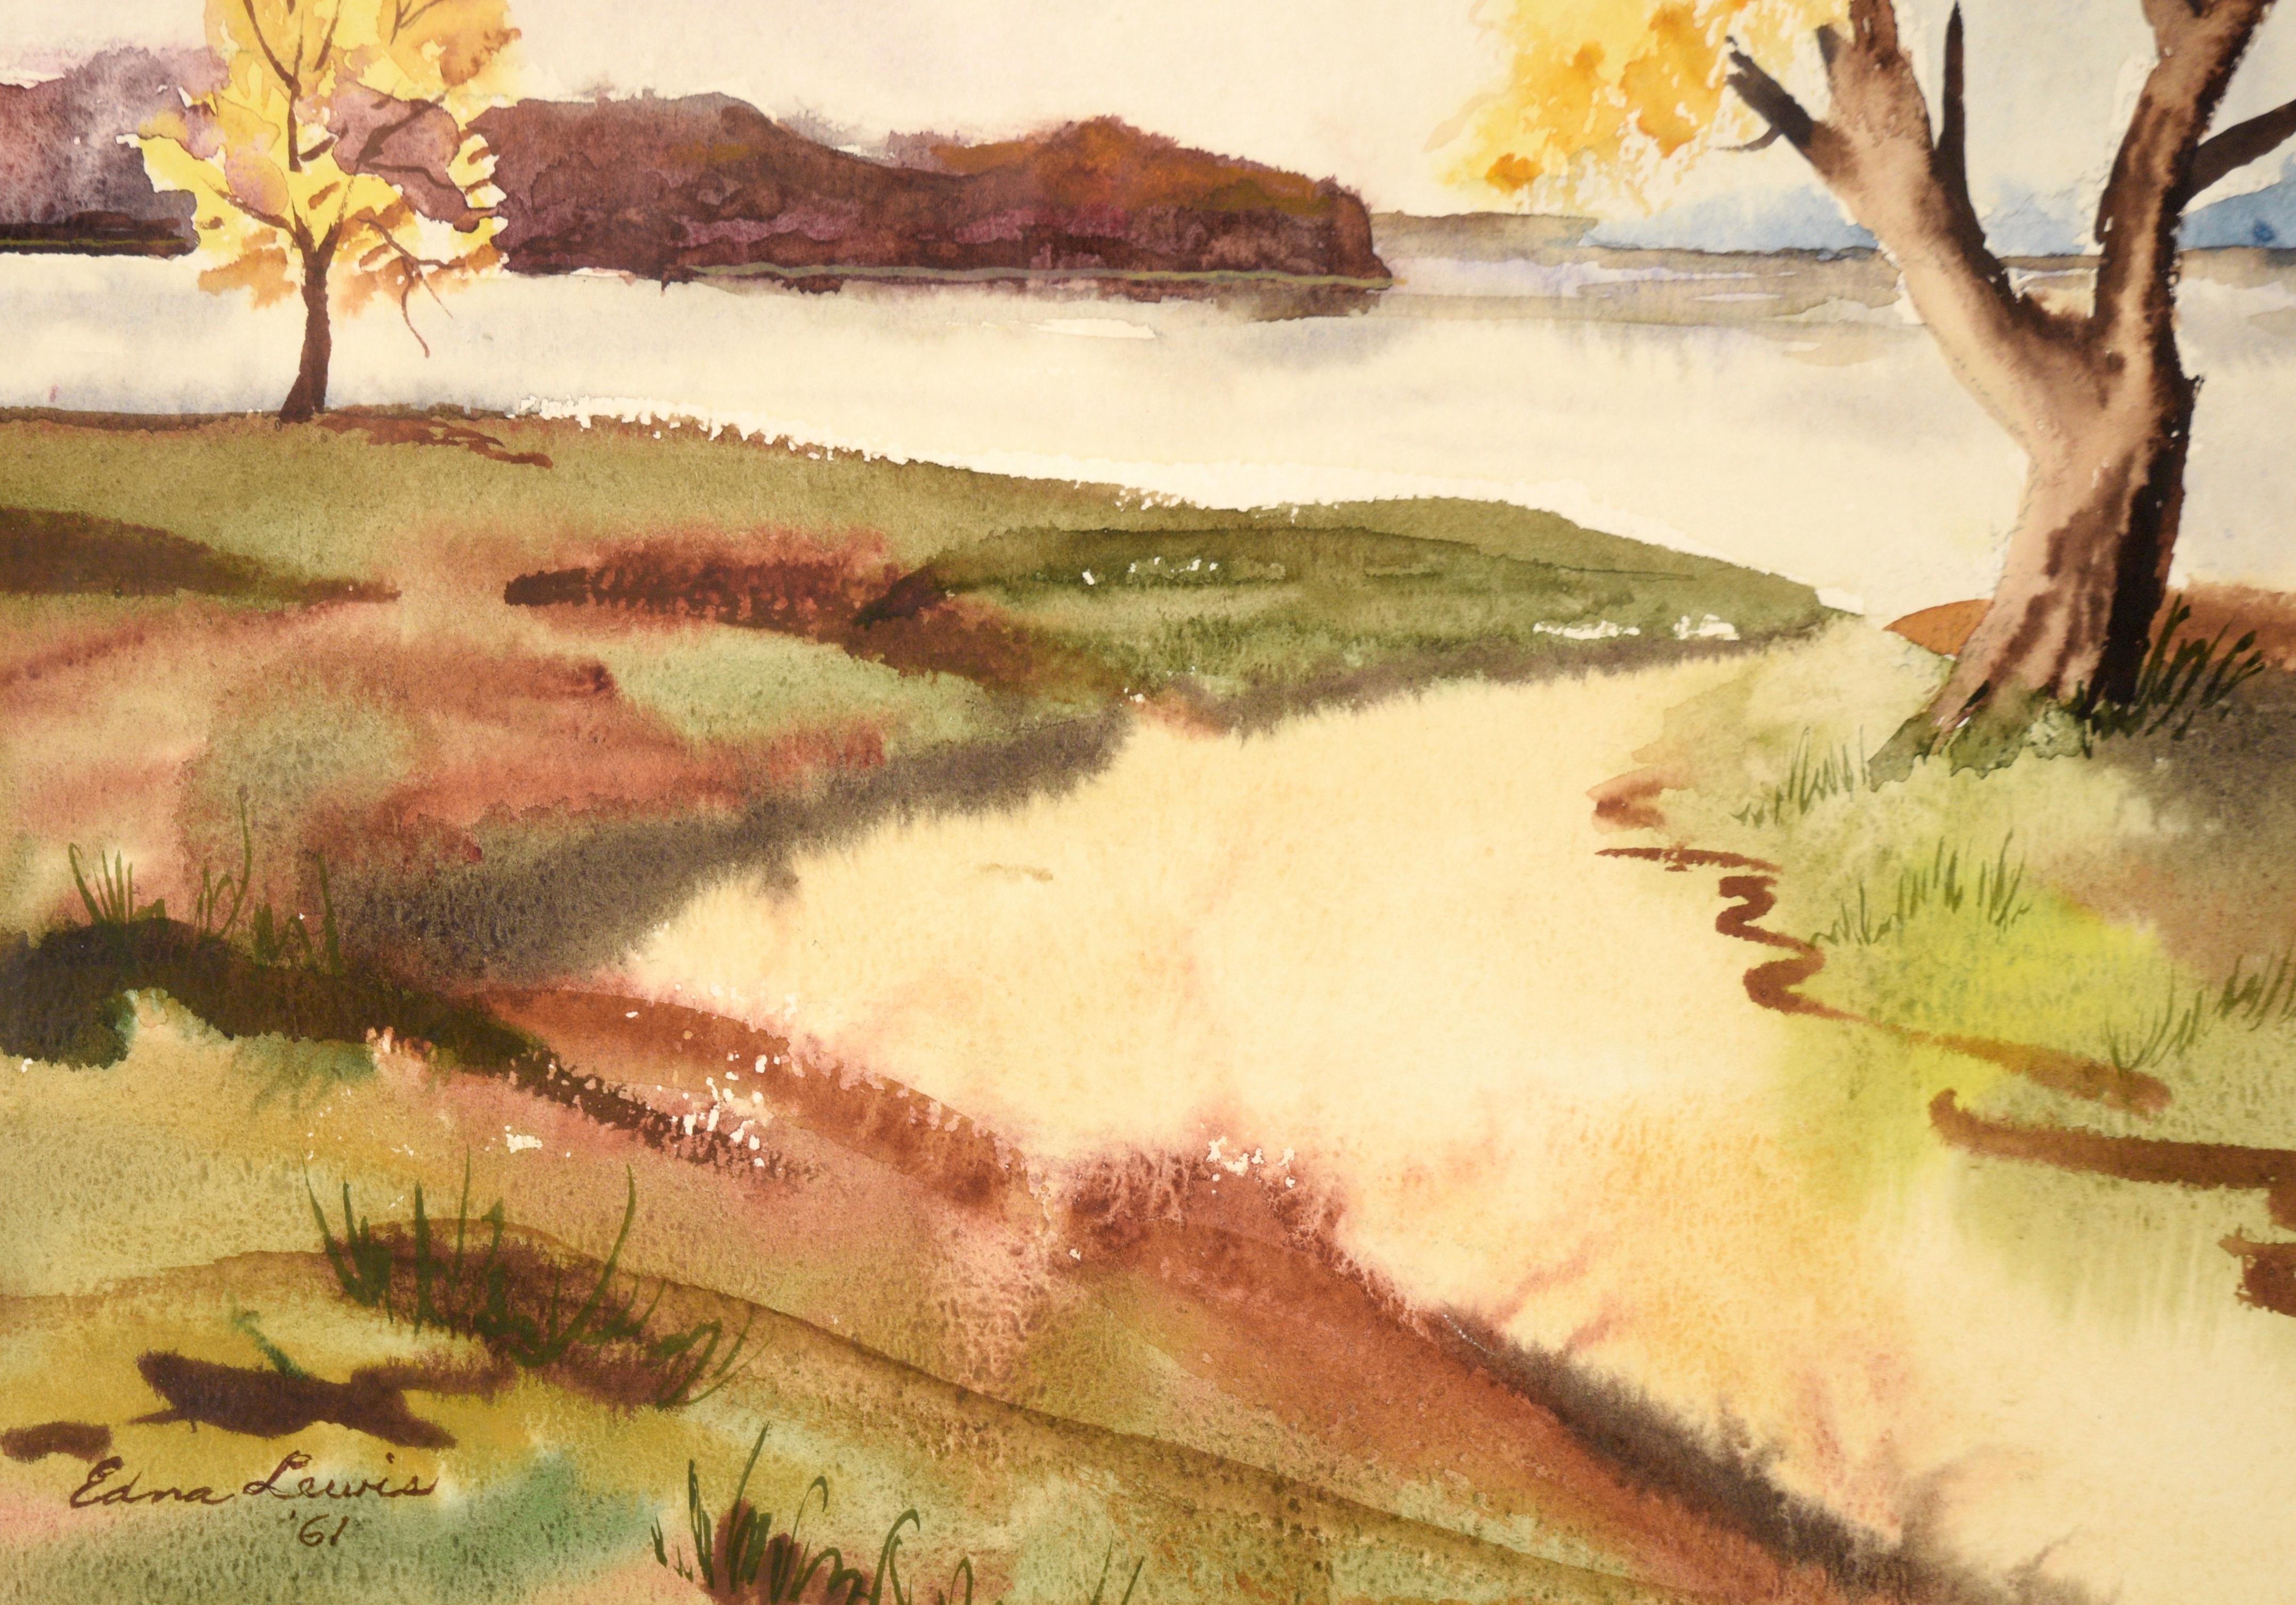 Lake Landscape with Yellow Trees - Watercolor on Paper - Beige Landscape Art by Edna Evelyn Sutherland Lewis